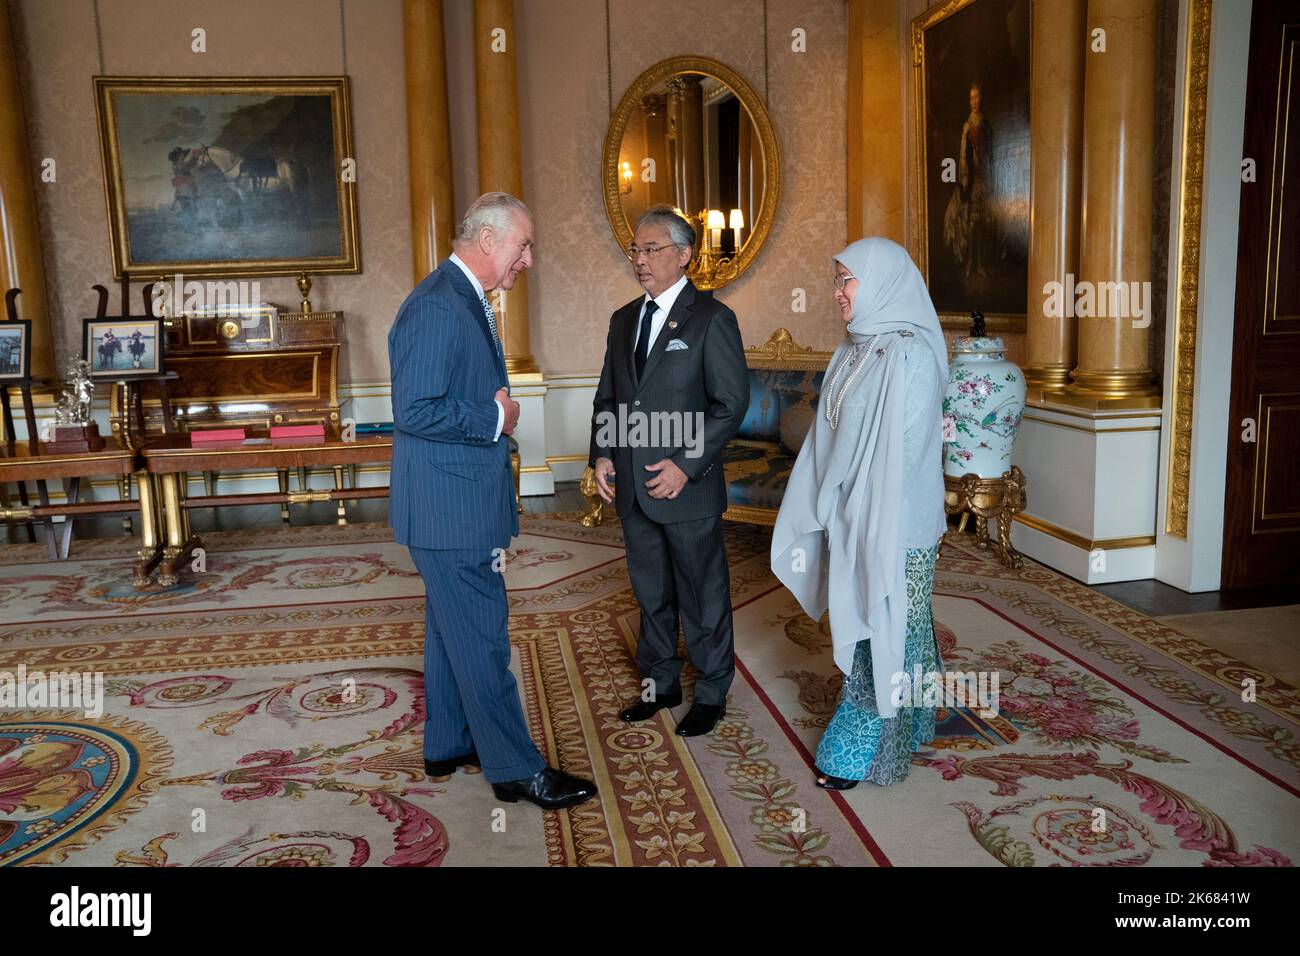 King Charles III during an audience with the King and Queen of Malaysia, The Yang Di-Pertuan Agong XVI and the Raja Permaisuri Agong of Malaysia (H.M Al-Sultan Abdullah and H.M Tunku Azizah Aminah) at Buckingham Palace, London. Picture date: Wednesday October 12, 2022. Stock Photo